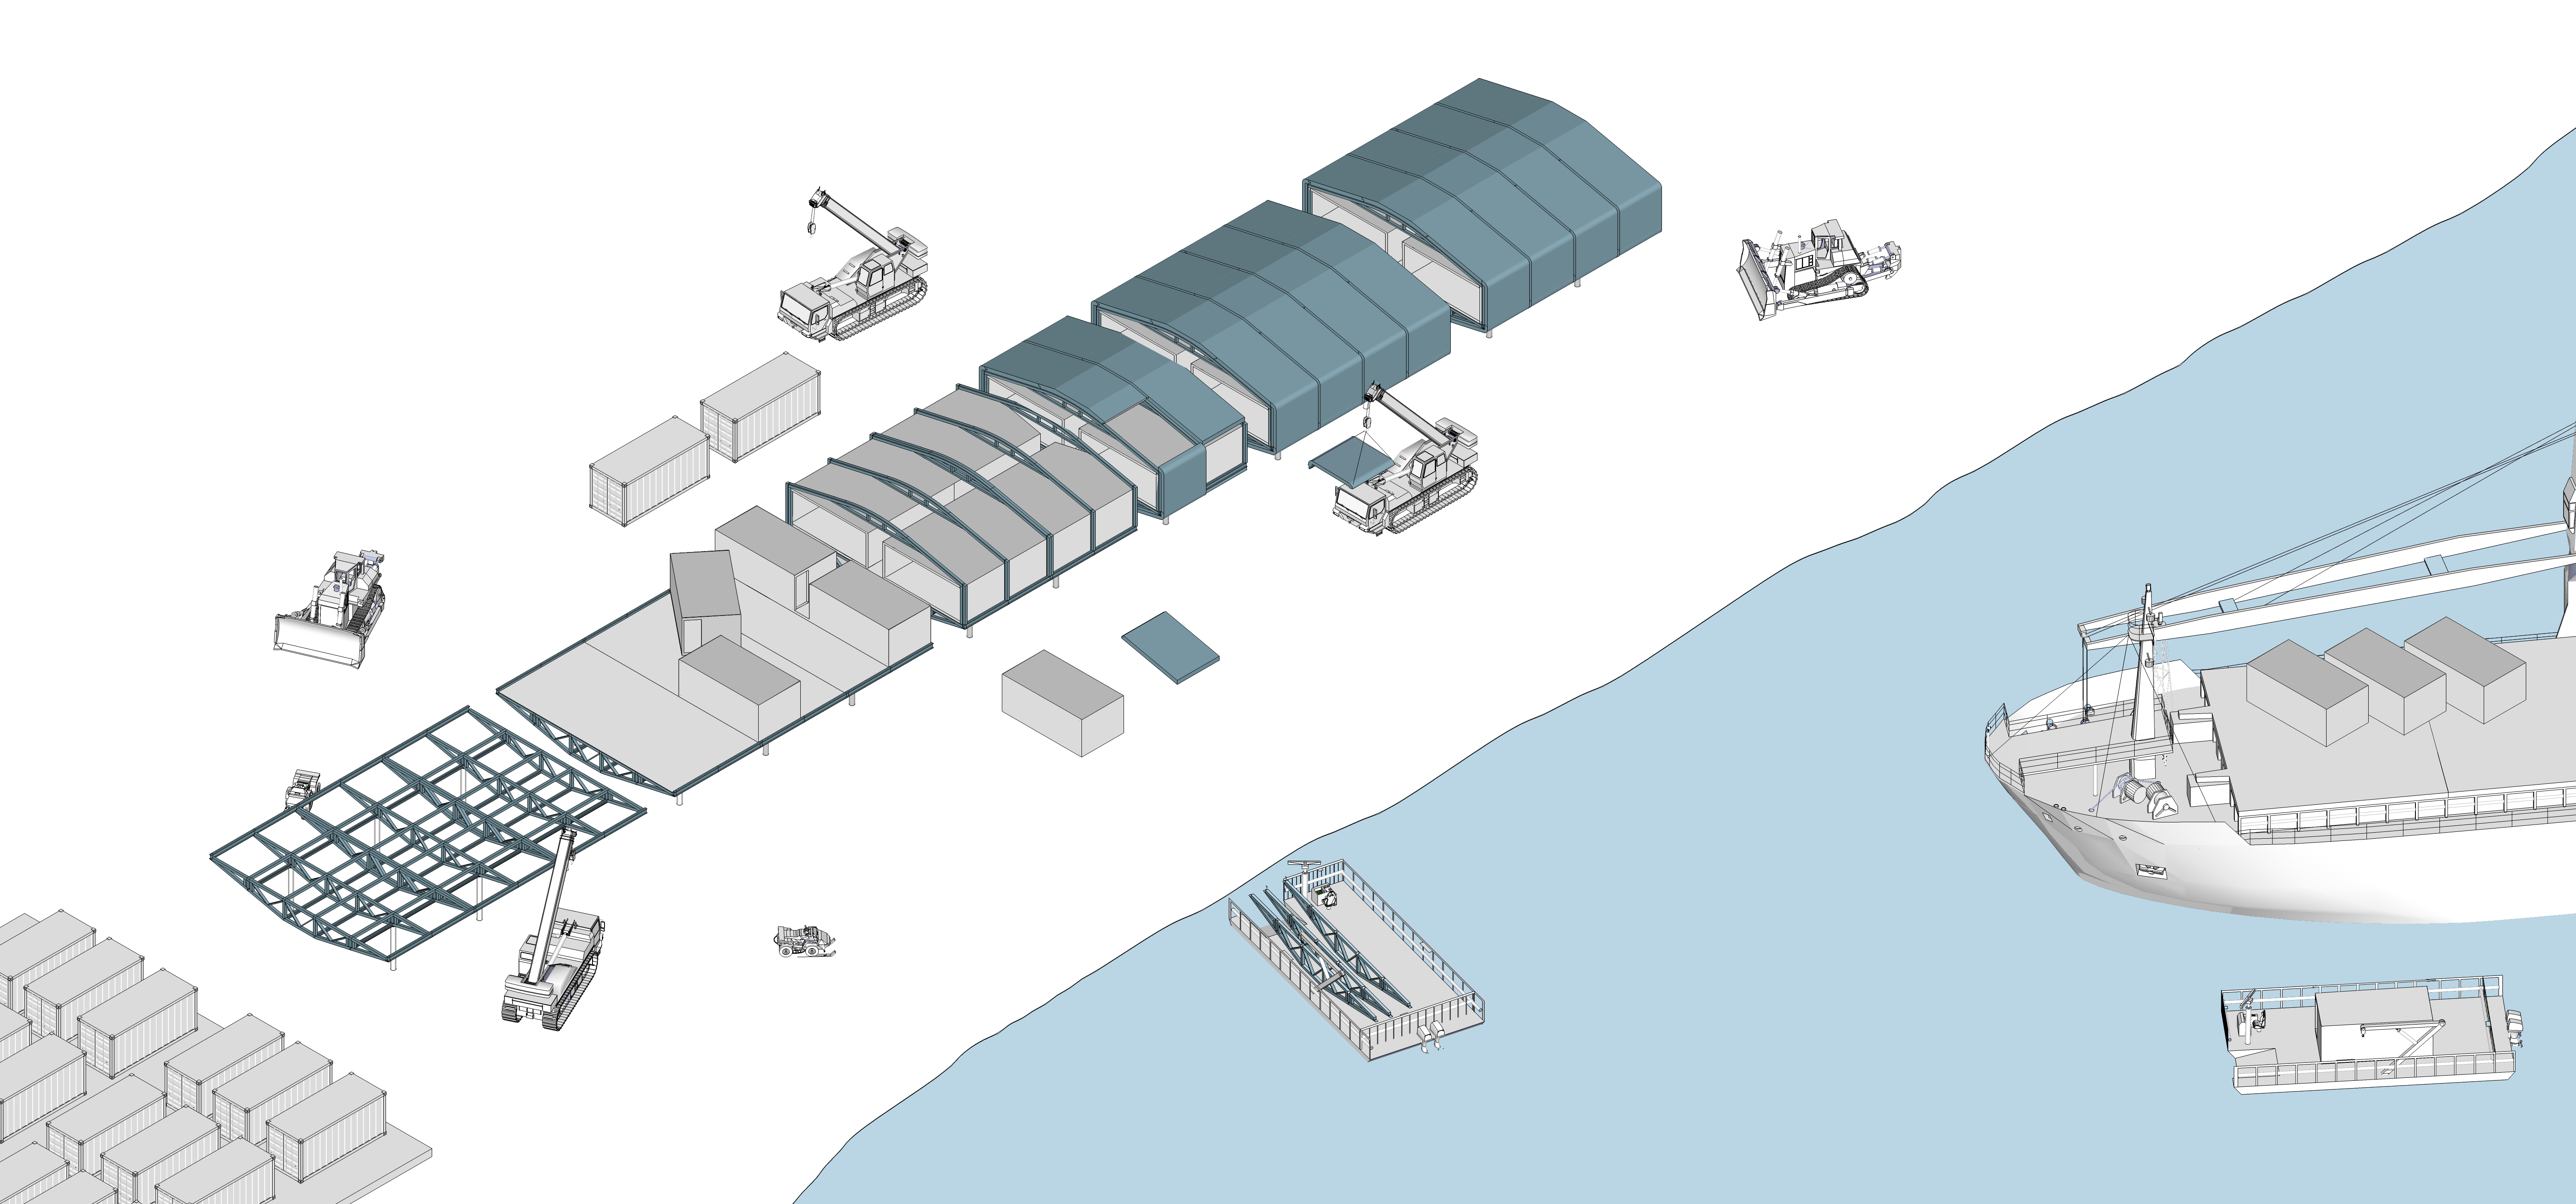 Illustration of the station construction, and the shipment of prefabricated components